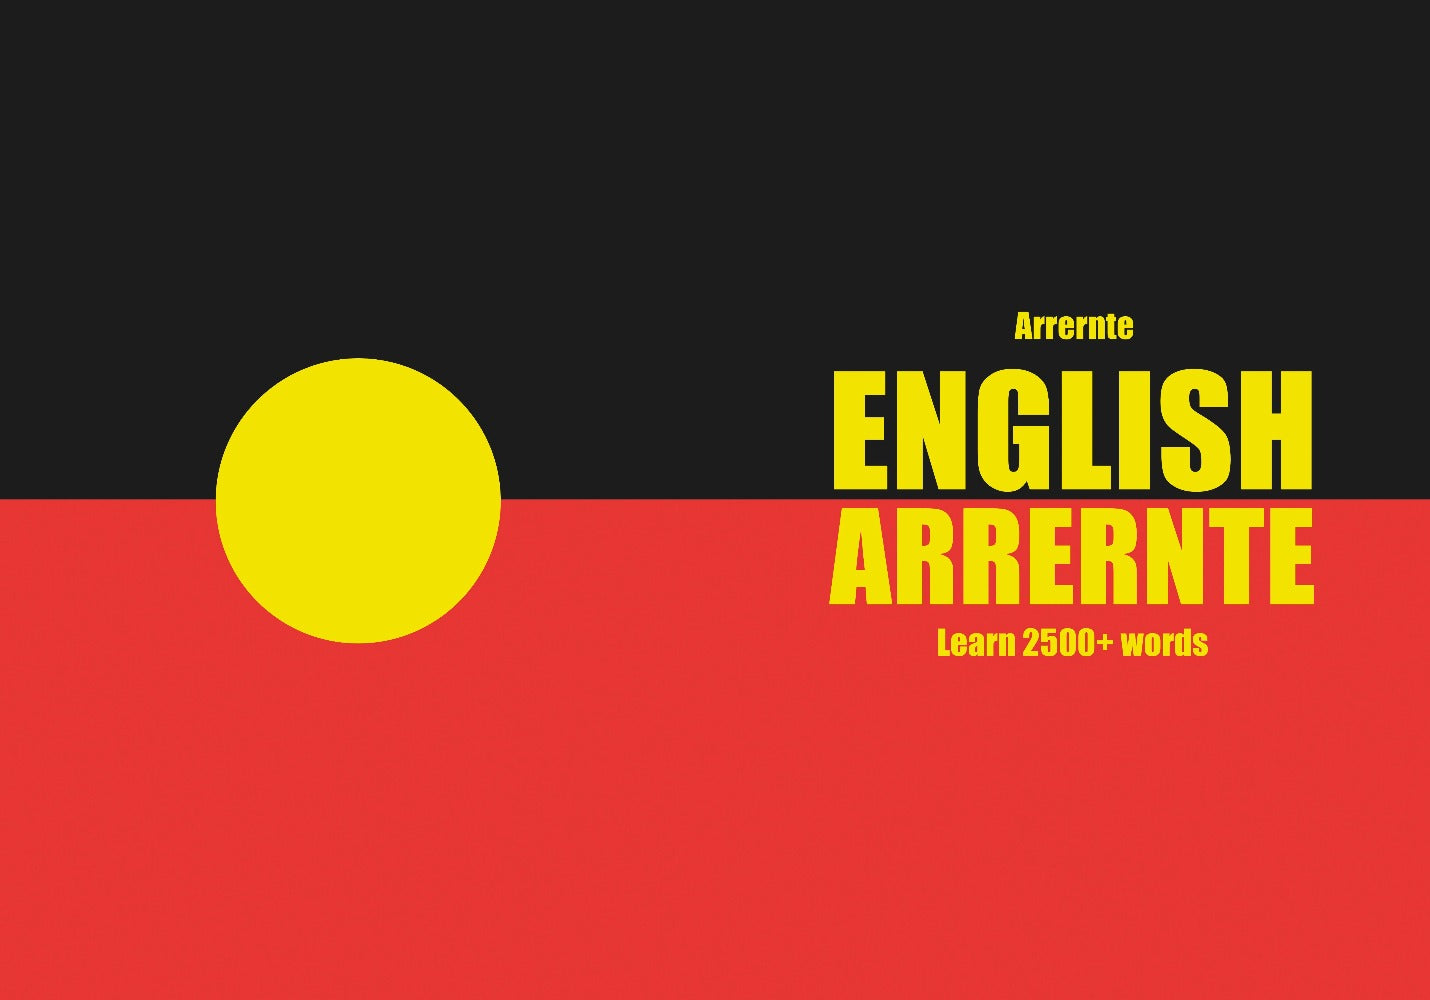 Arrernte language learning notebook cover